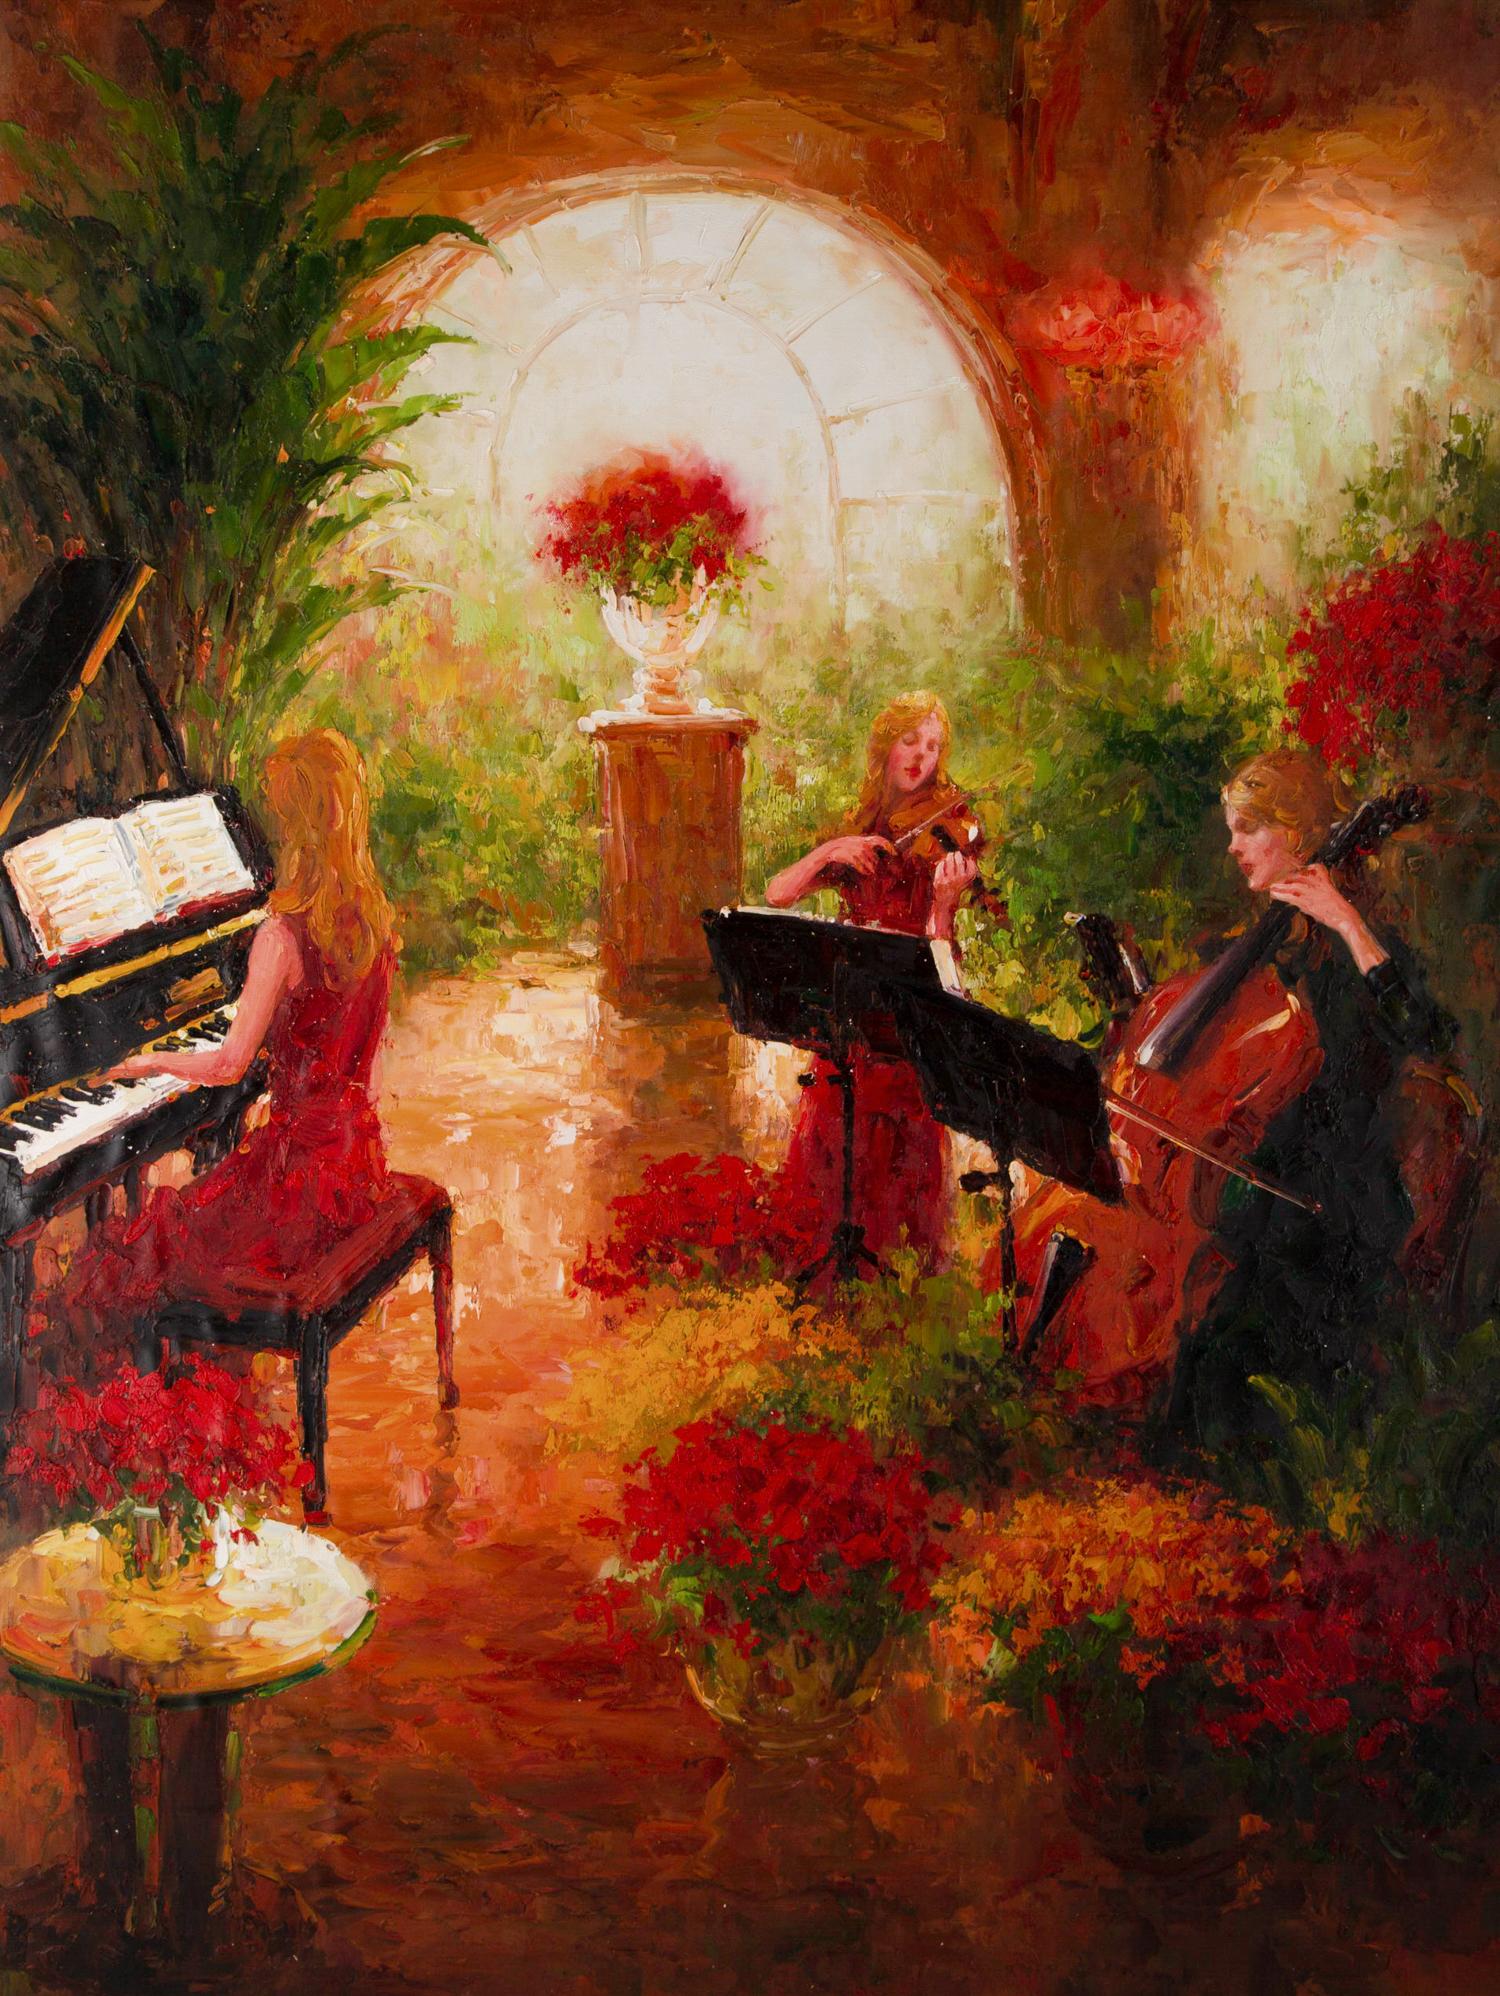 Title: Performance
Medium: Oil on canvas
Size: 39 x 30 inches
Frame: Framing options available!
Condition: The painting appears to be in excellent condition.

Year: 2000 Circa
Artist: Lin Hongdan
Signature: Unsigned
Signature Location: